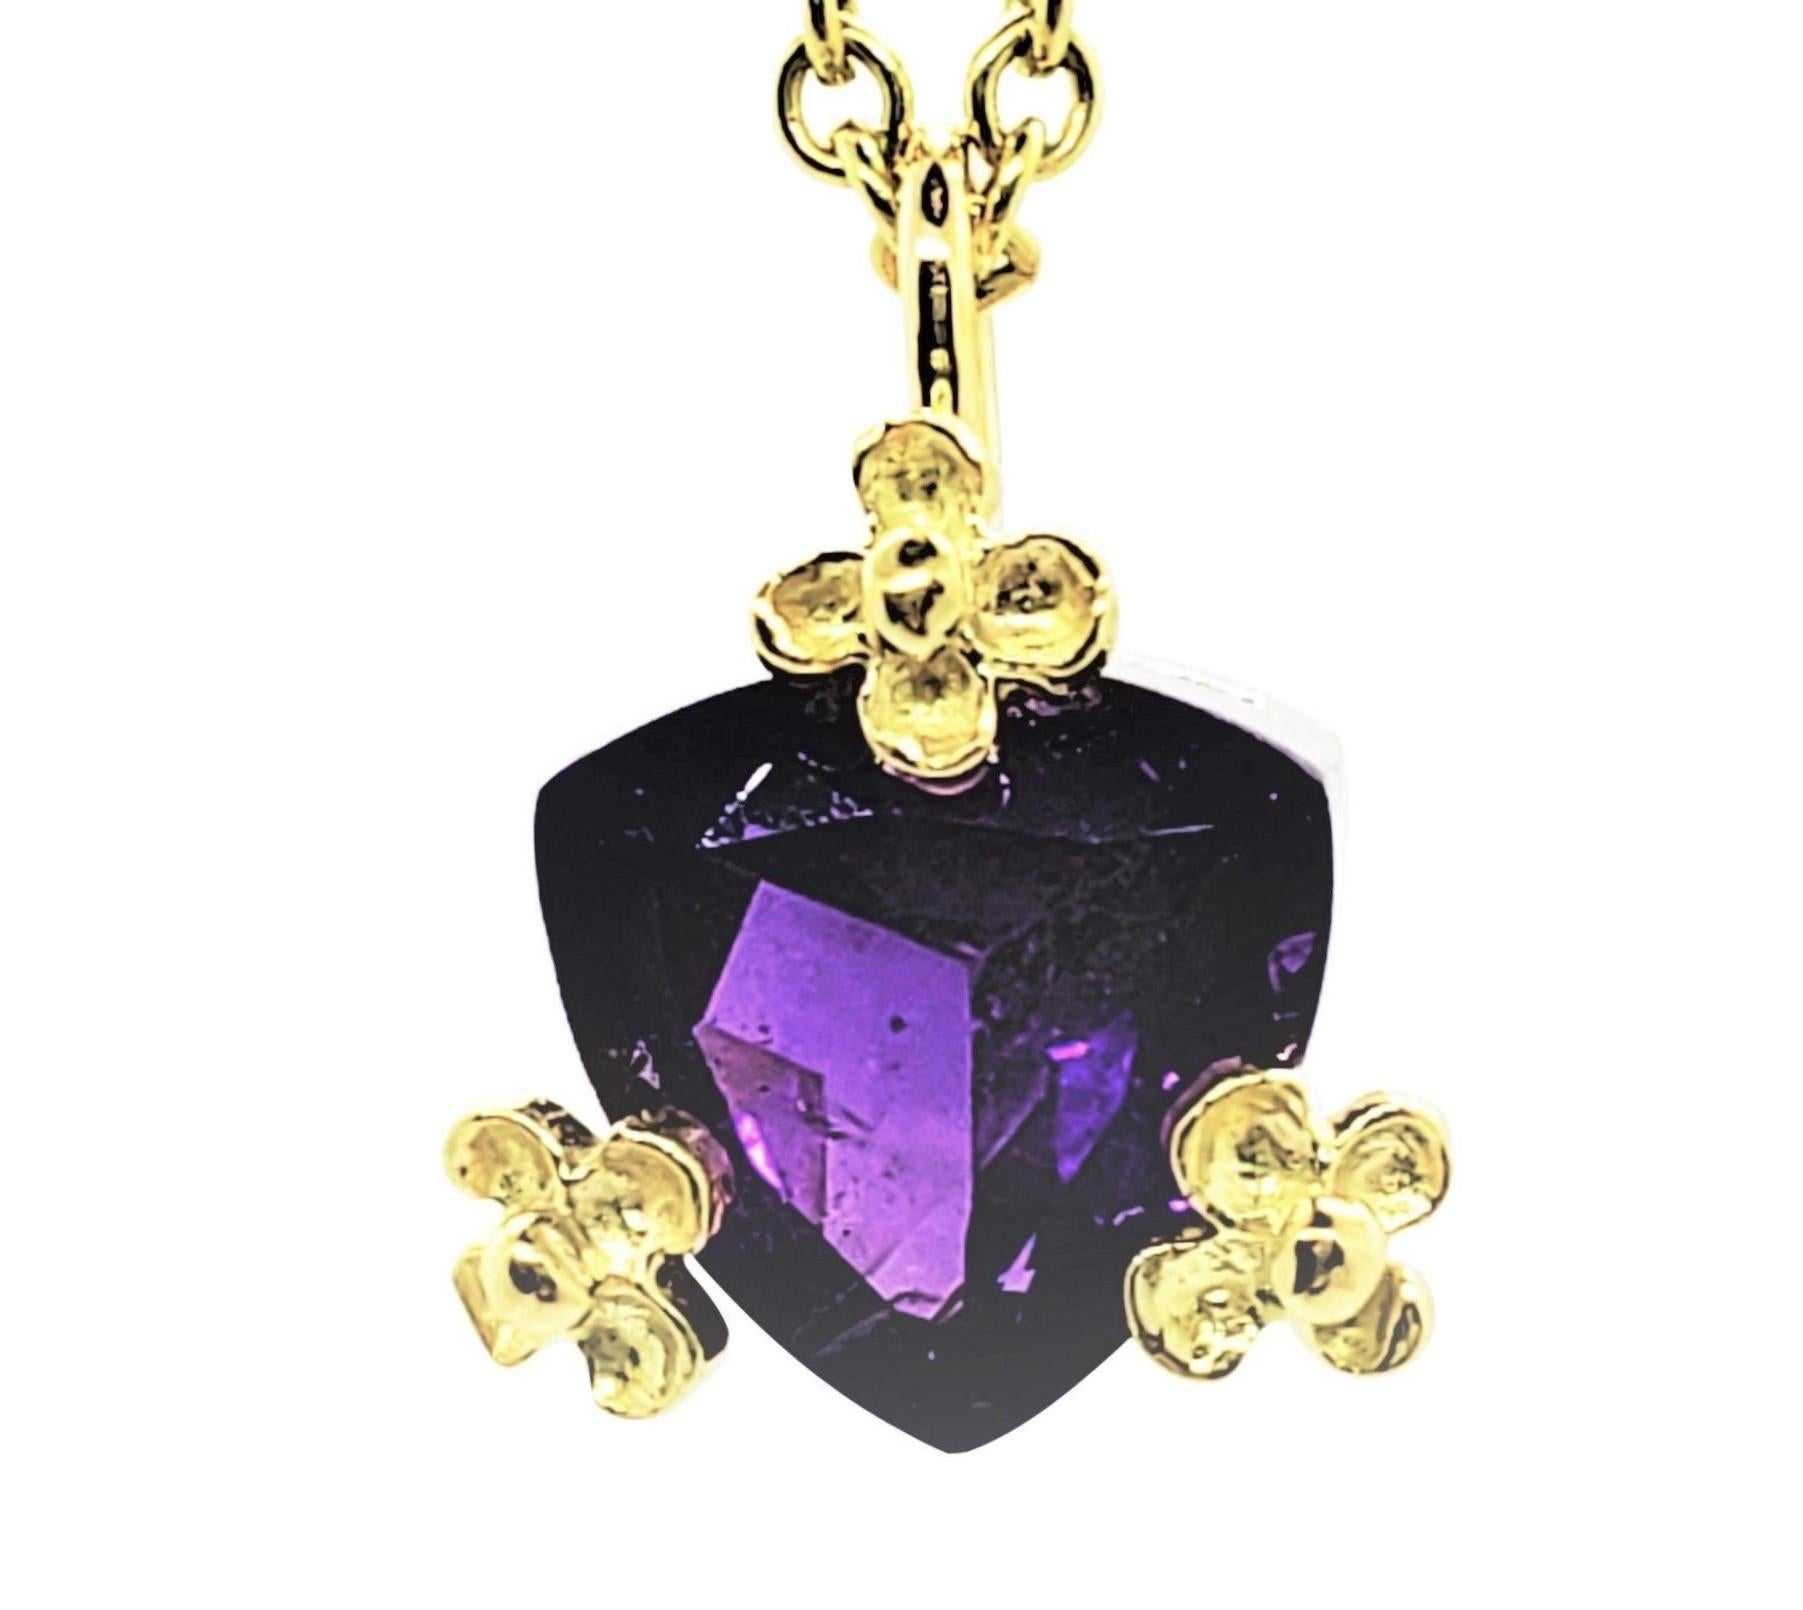 Made for February Birthstone Amethyst, a beautiful Trillion faceted gemstone set in a custom 14K Yellow and 14K Pink gold setting with 18K Y flower prongs.
Simplicity with a royal look in purple Amethyst and in a demure size, this design packs a lot